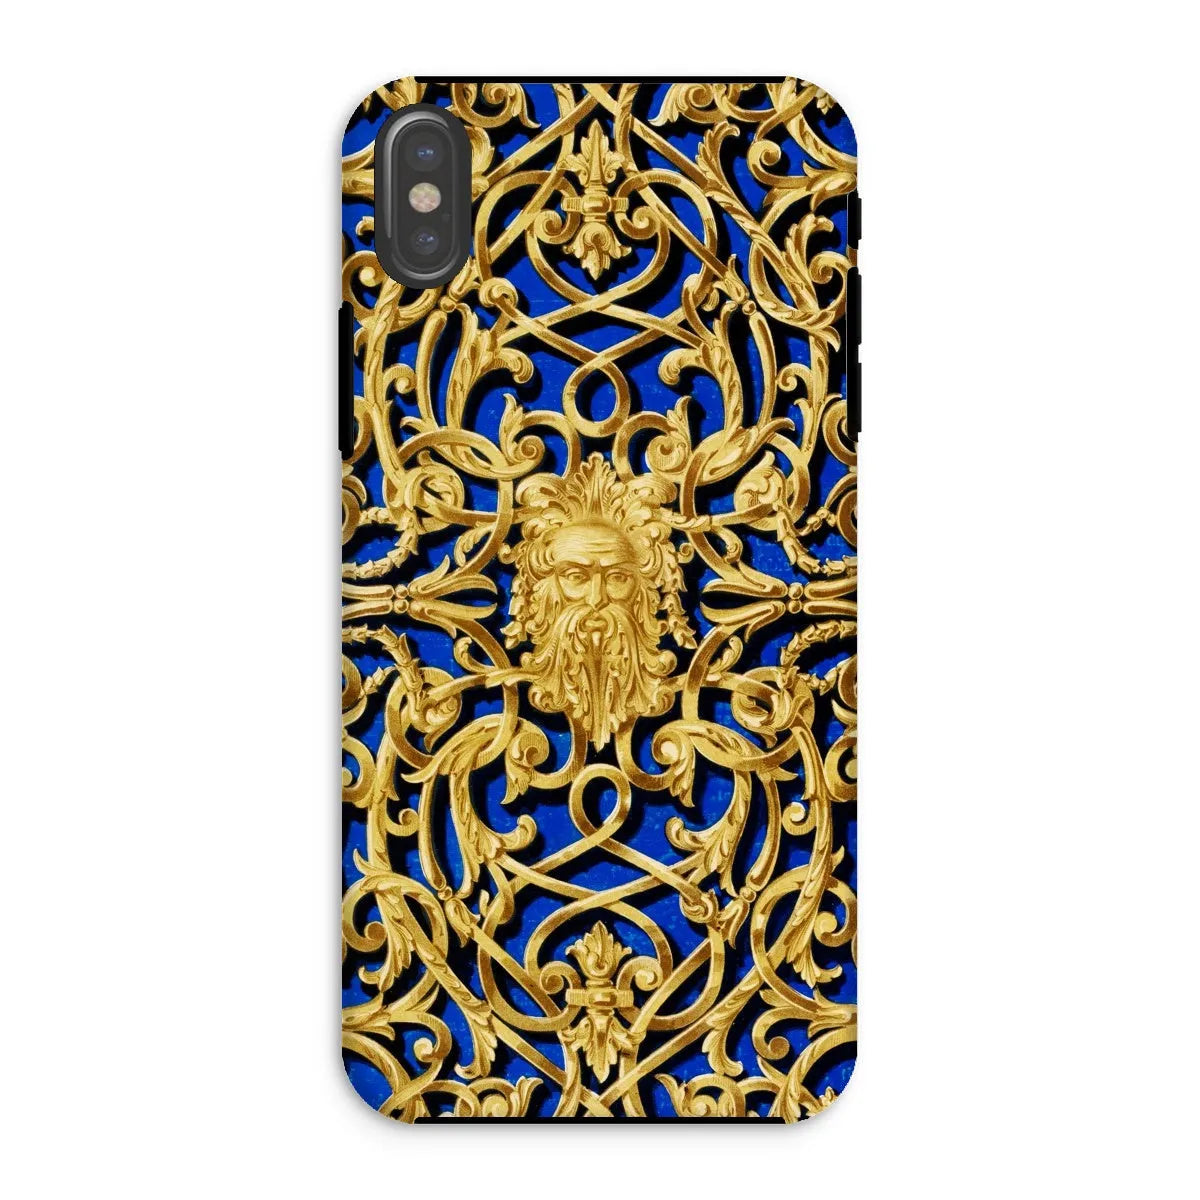 Gilded Gate Victorian Phone Case - Sir Matthew Digby Wyatt - Iphone Xs / Matte - Mobile Phone Cases - Aesthetic Art